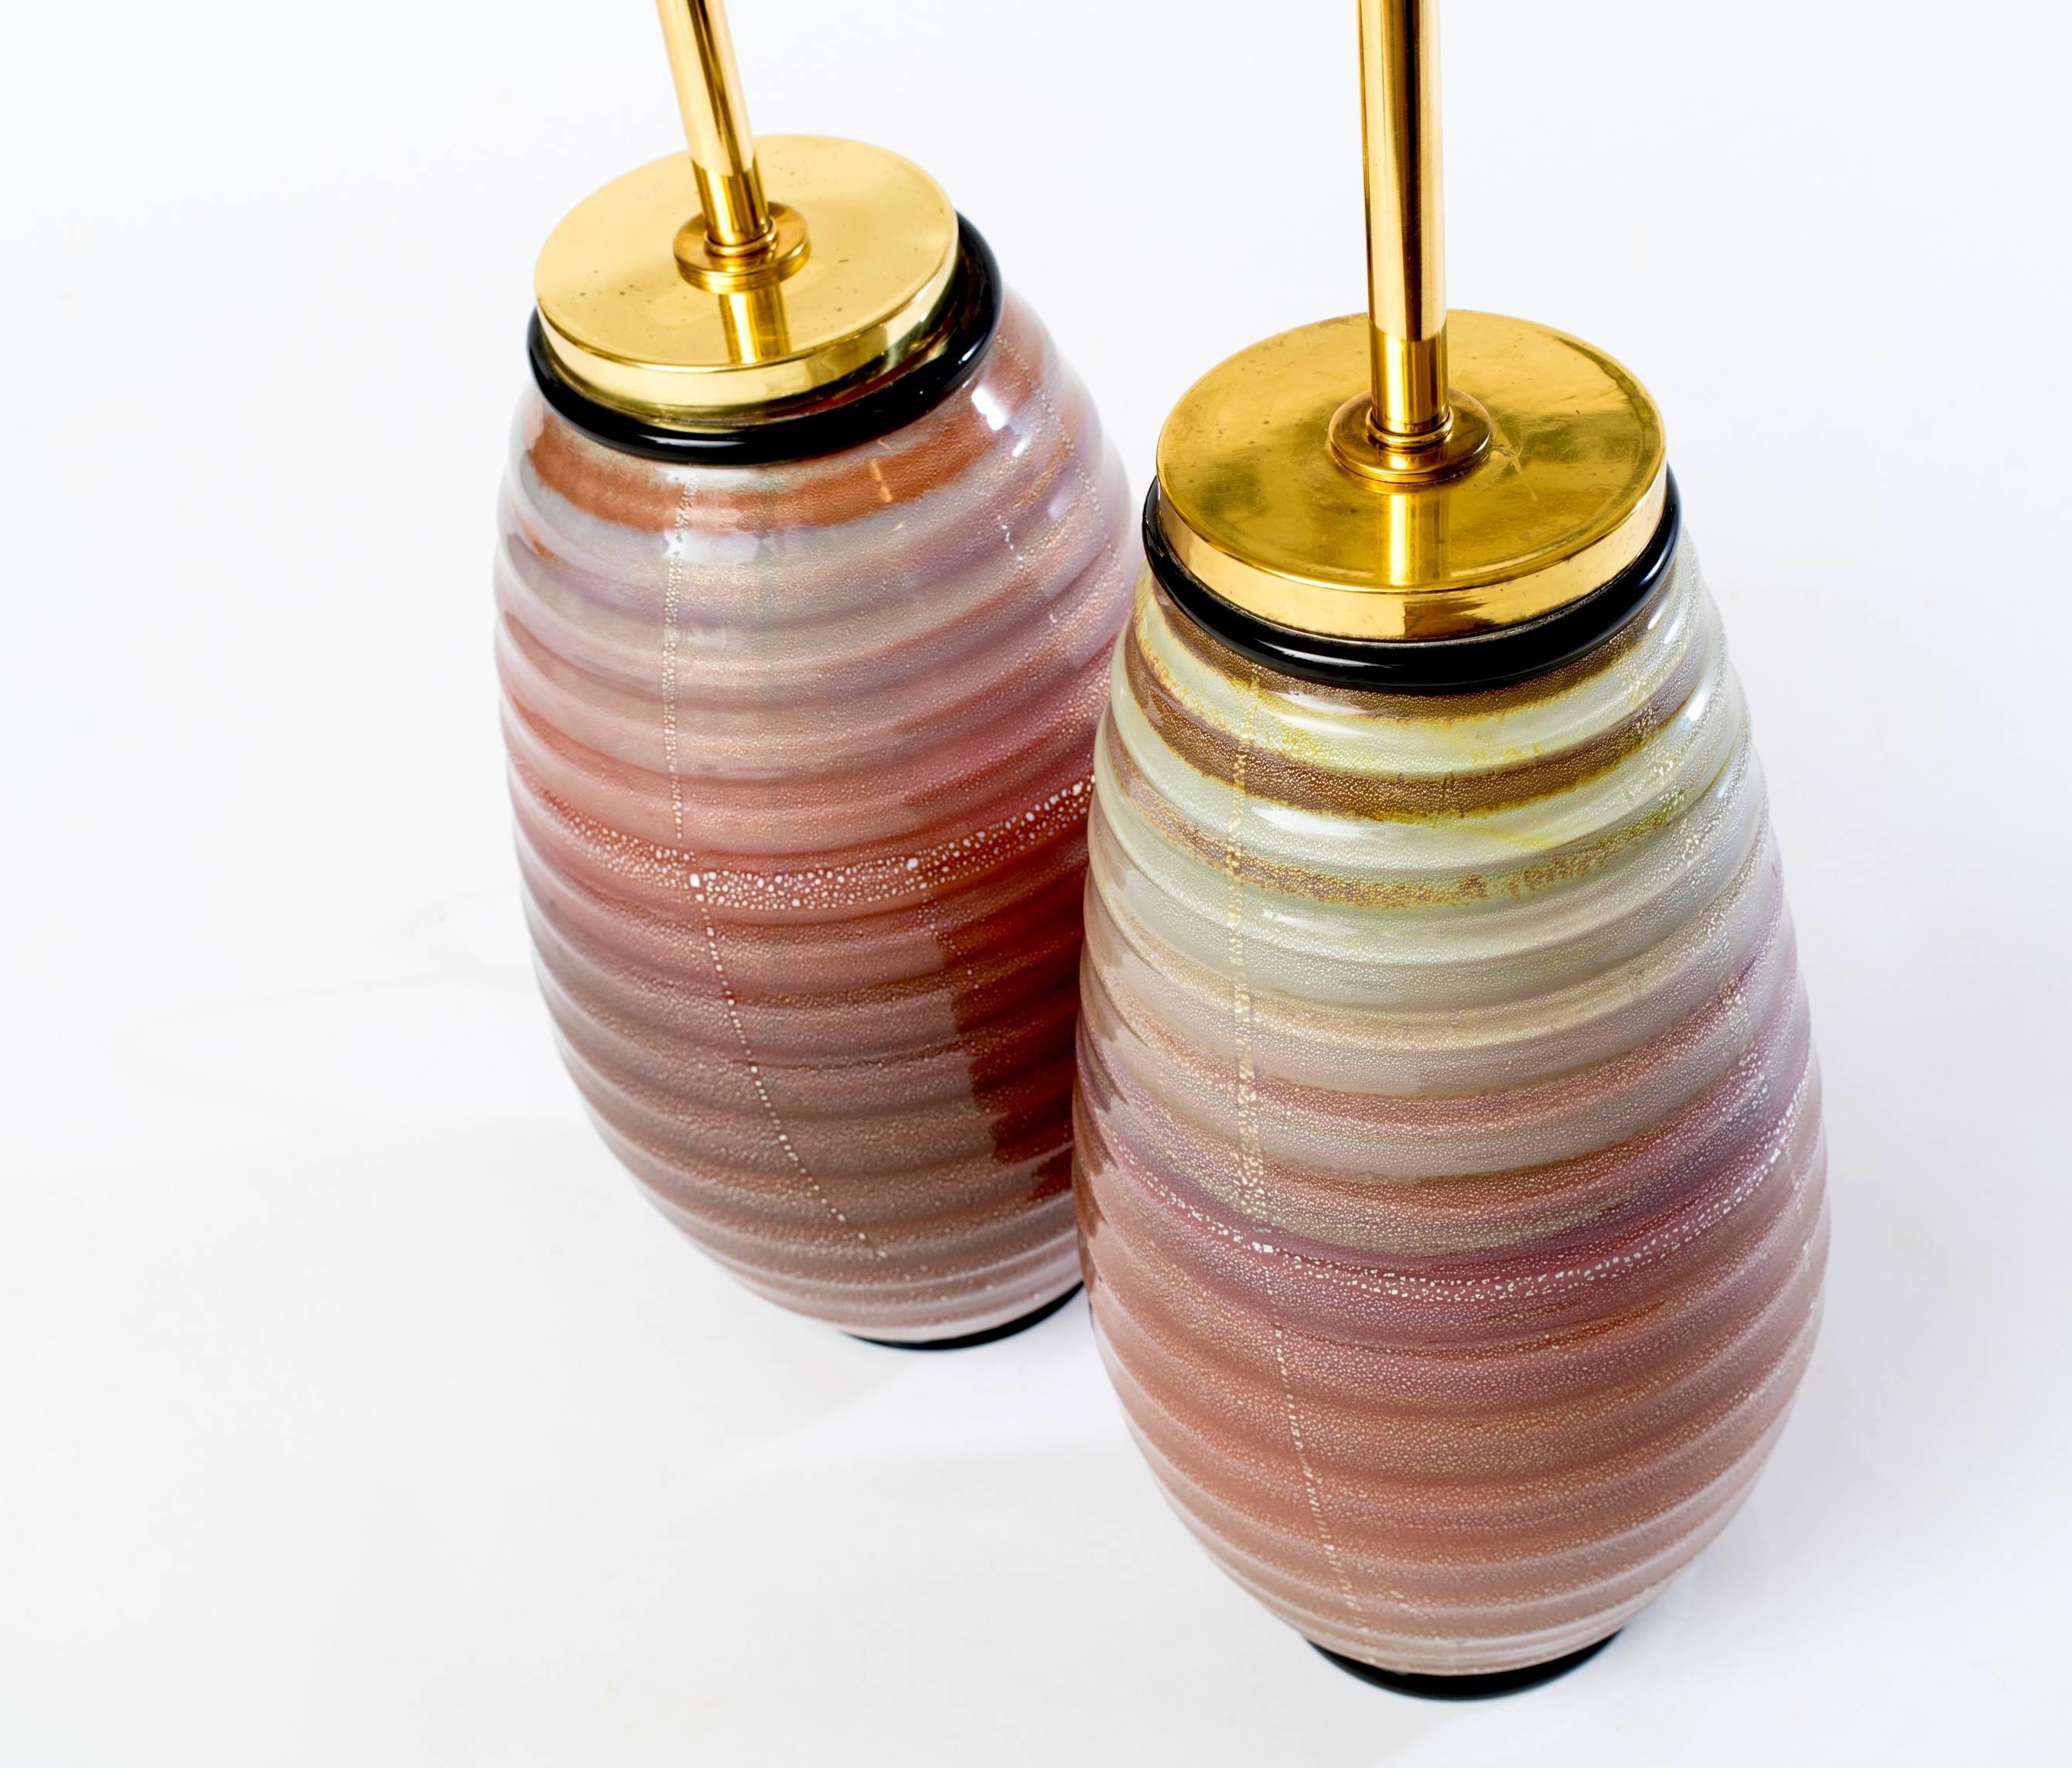 Stunning and rare pair of large Seguso Murano table lamps, circa late 1940s-early 1950s. Beautiful cased glass with mica and a black lip wrap to the top and base. Colors graduate from champagne to dark cinnabar with lines of mica and each lamp is